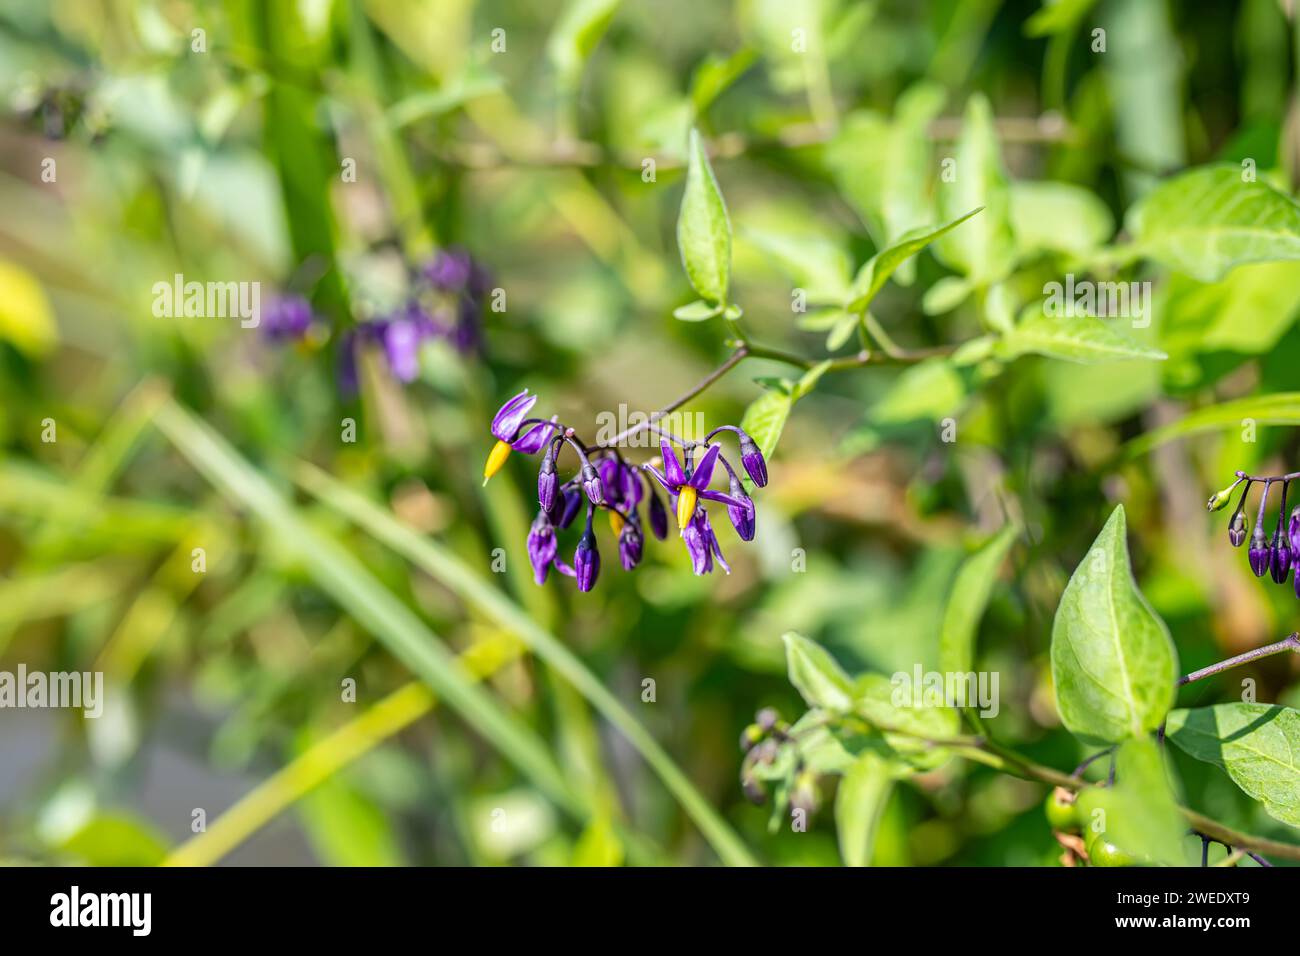 Solanum dulcamara, Solanum, Solanaceae., bittersweet, Harvested for its medicinal properties. herb is revered for its anti-inflammatory qualities. hea Stock Photo